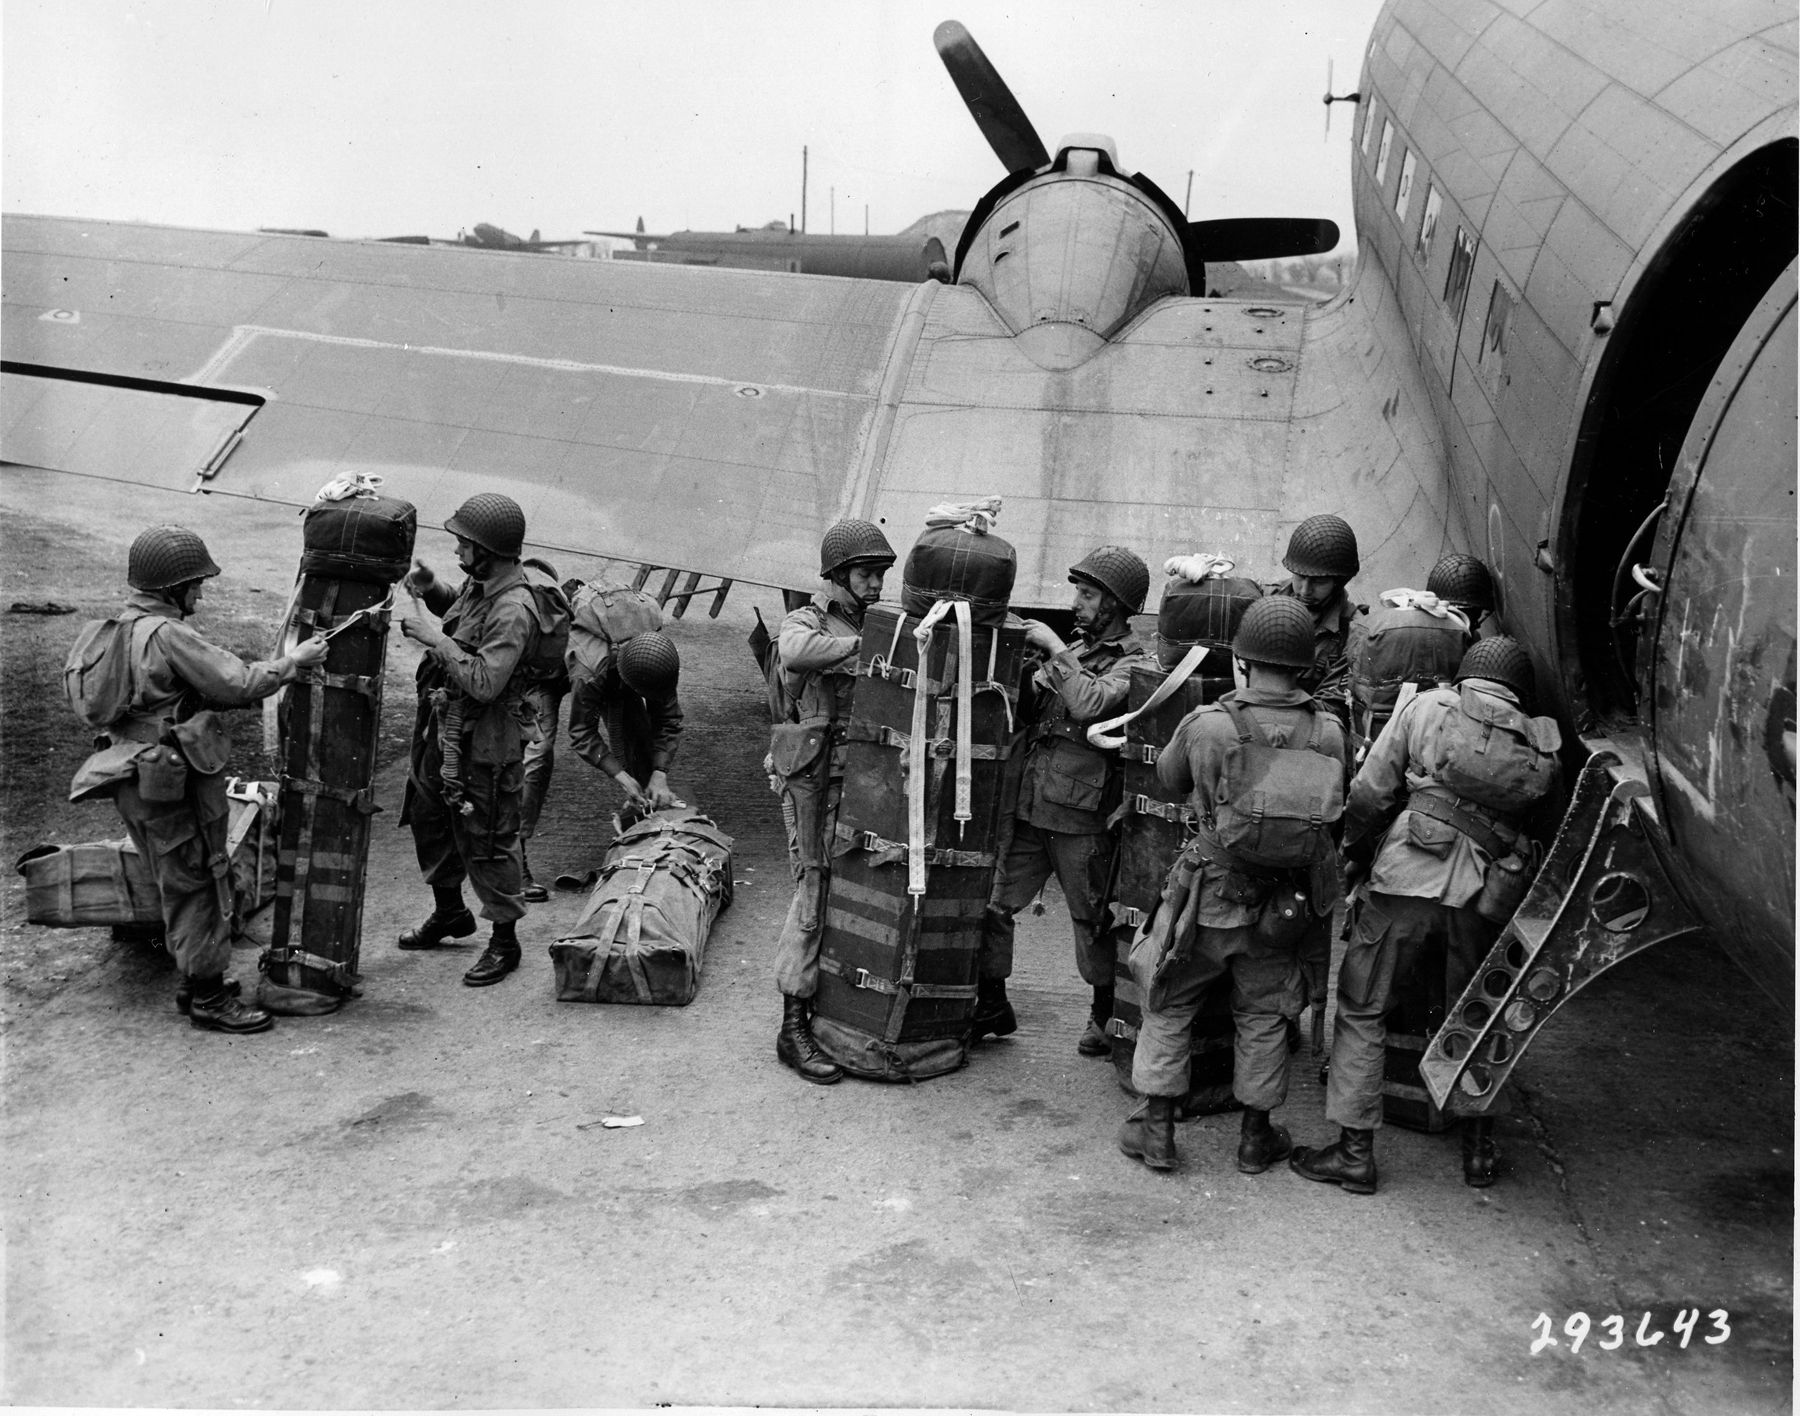 Airborne Soldiers of the 101st Airborne Division load equipment onto a C-47 in preparation for a jump. Mauser carried so much equipment for the D-Day assault that his comrades had to shove him into his plane.